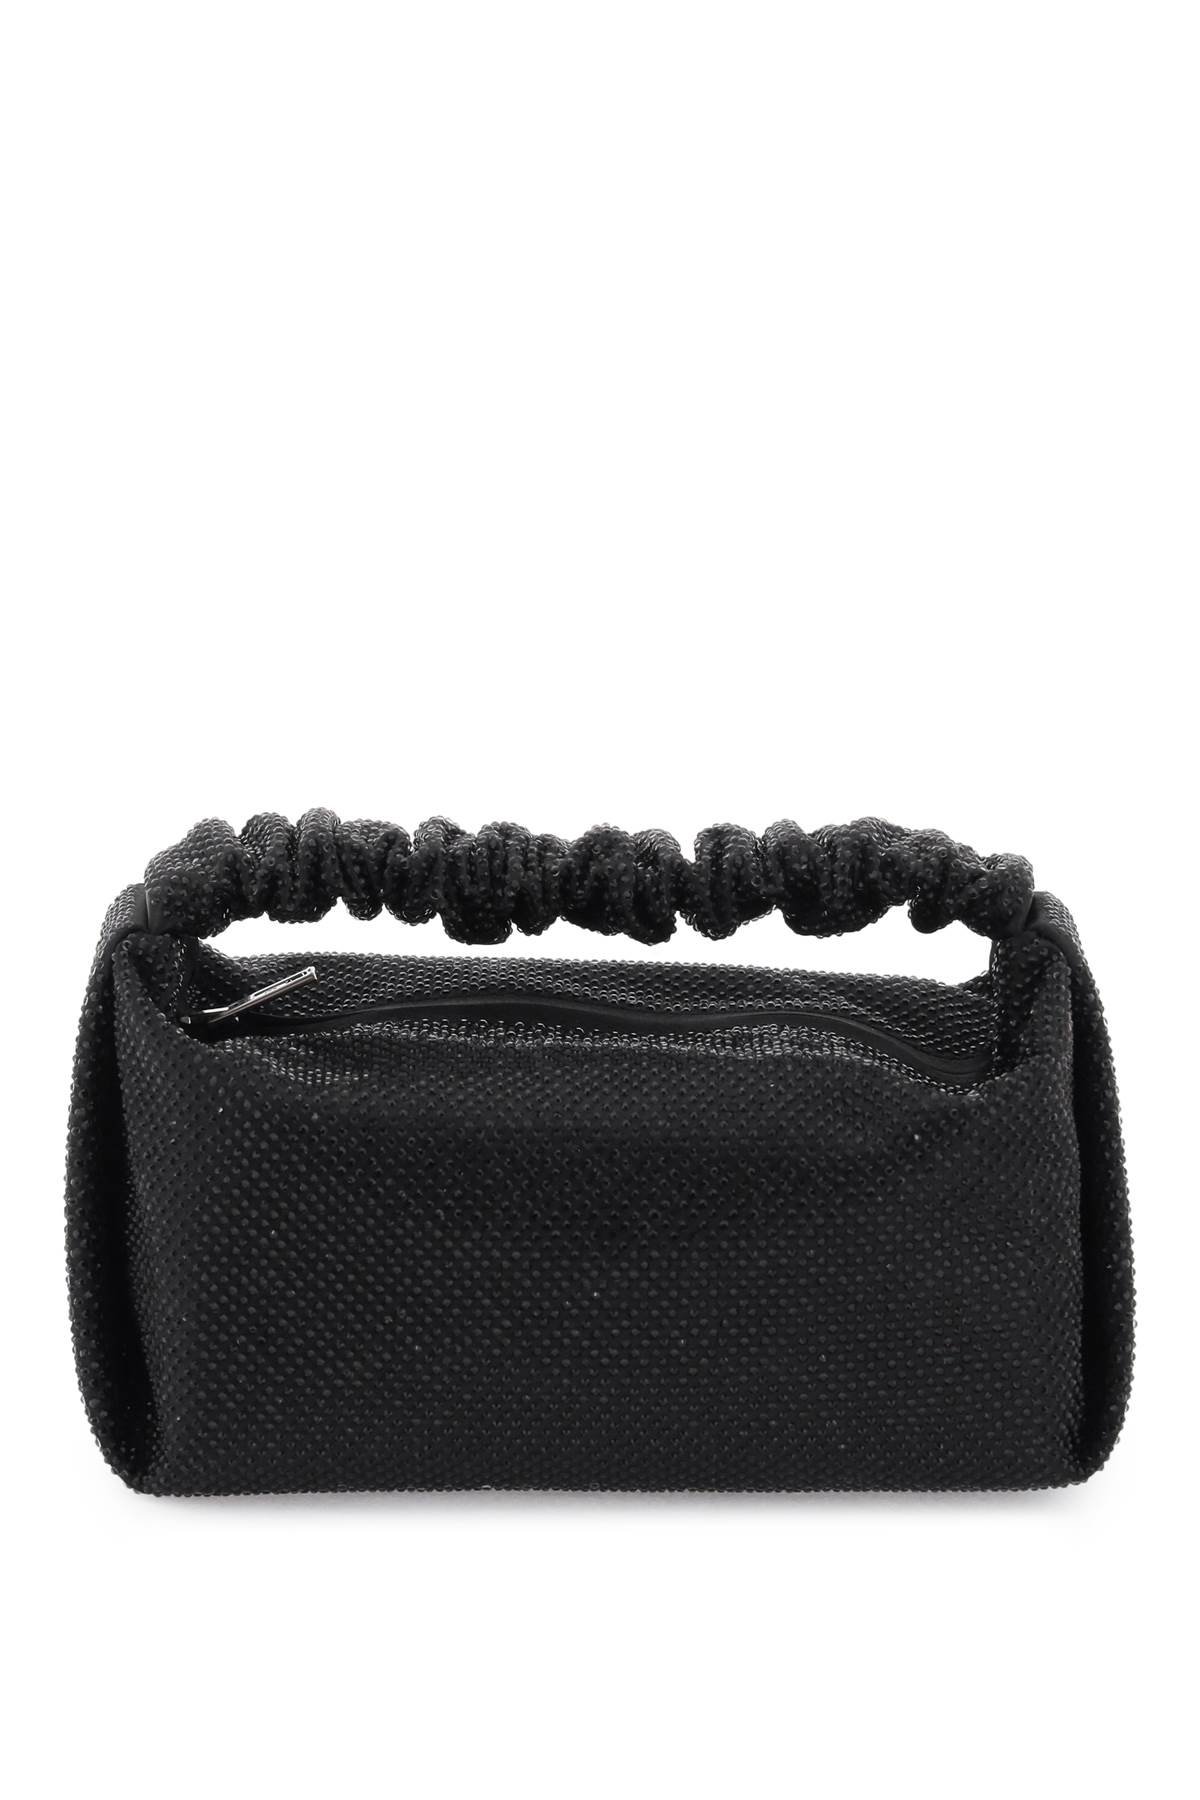 Alexander Wang Scrunchie Mini Bag With Crystals